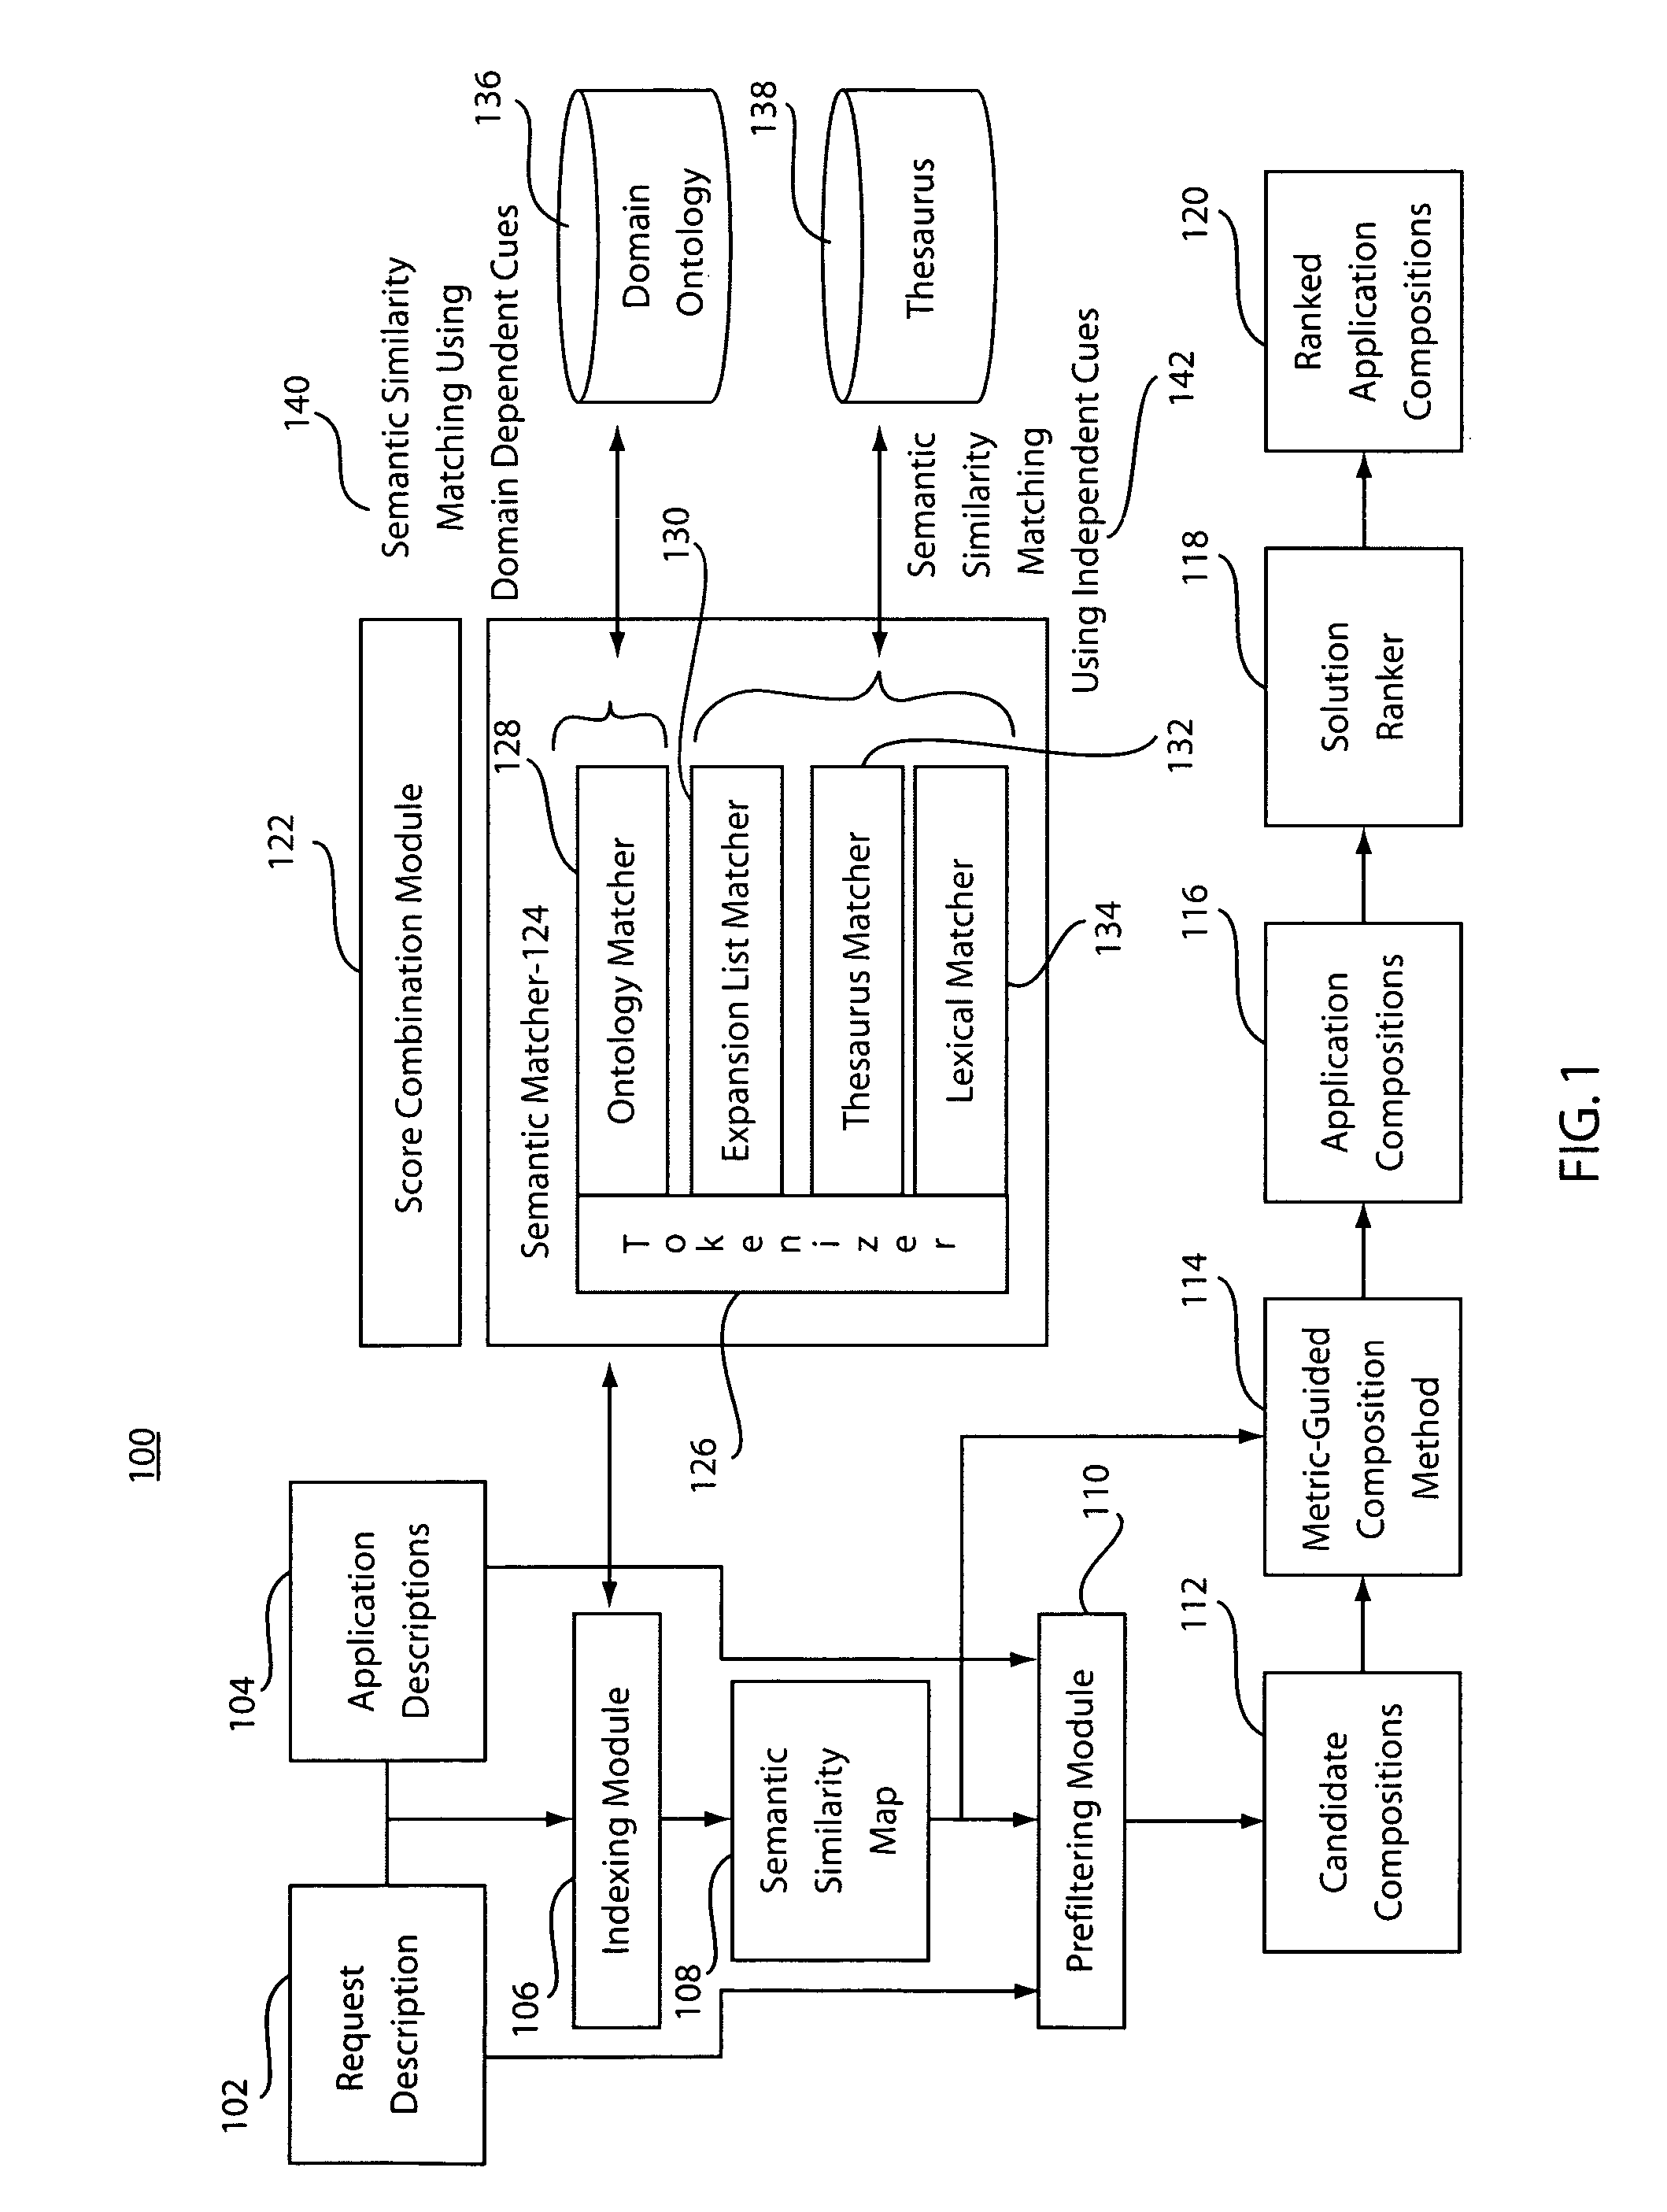 Method and system to compose software applications by combining planning with semantic reasoning